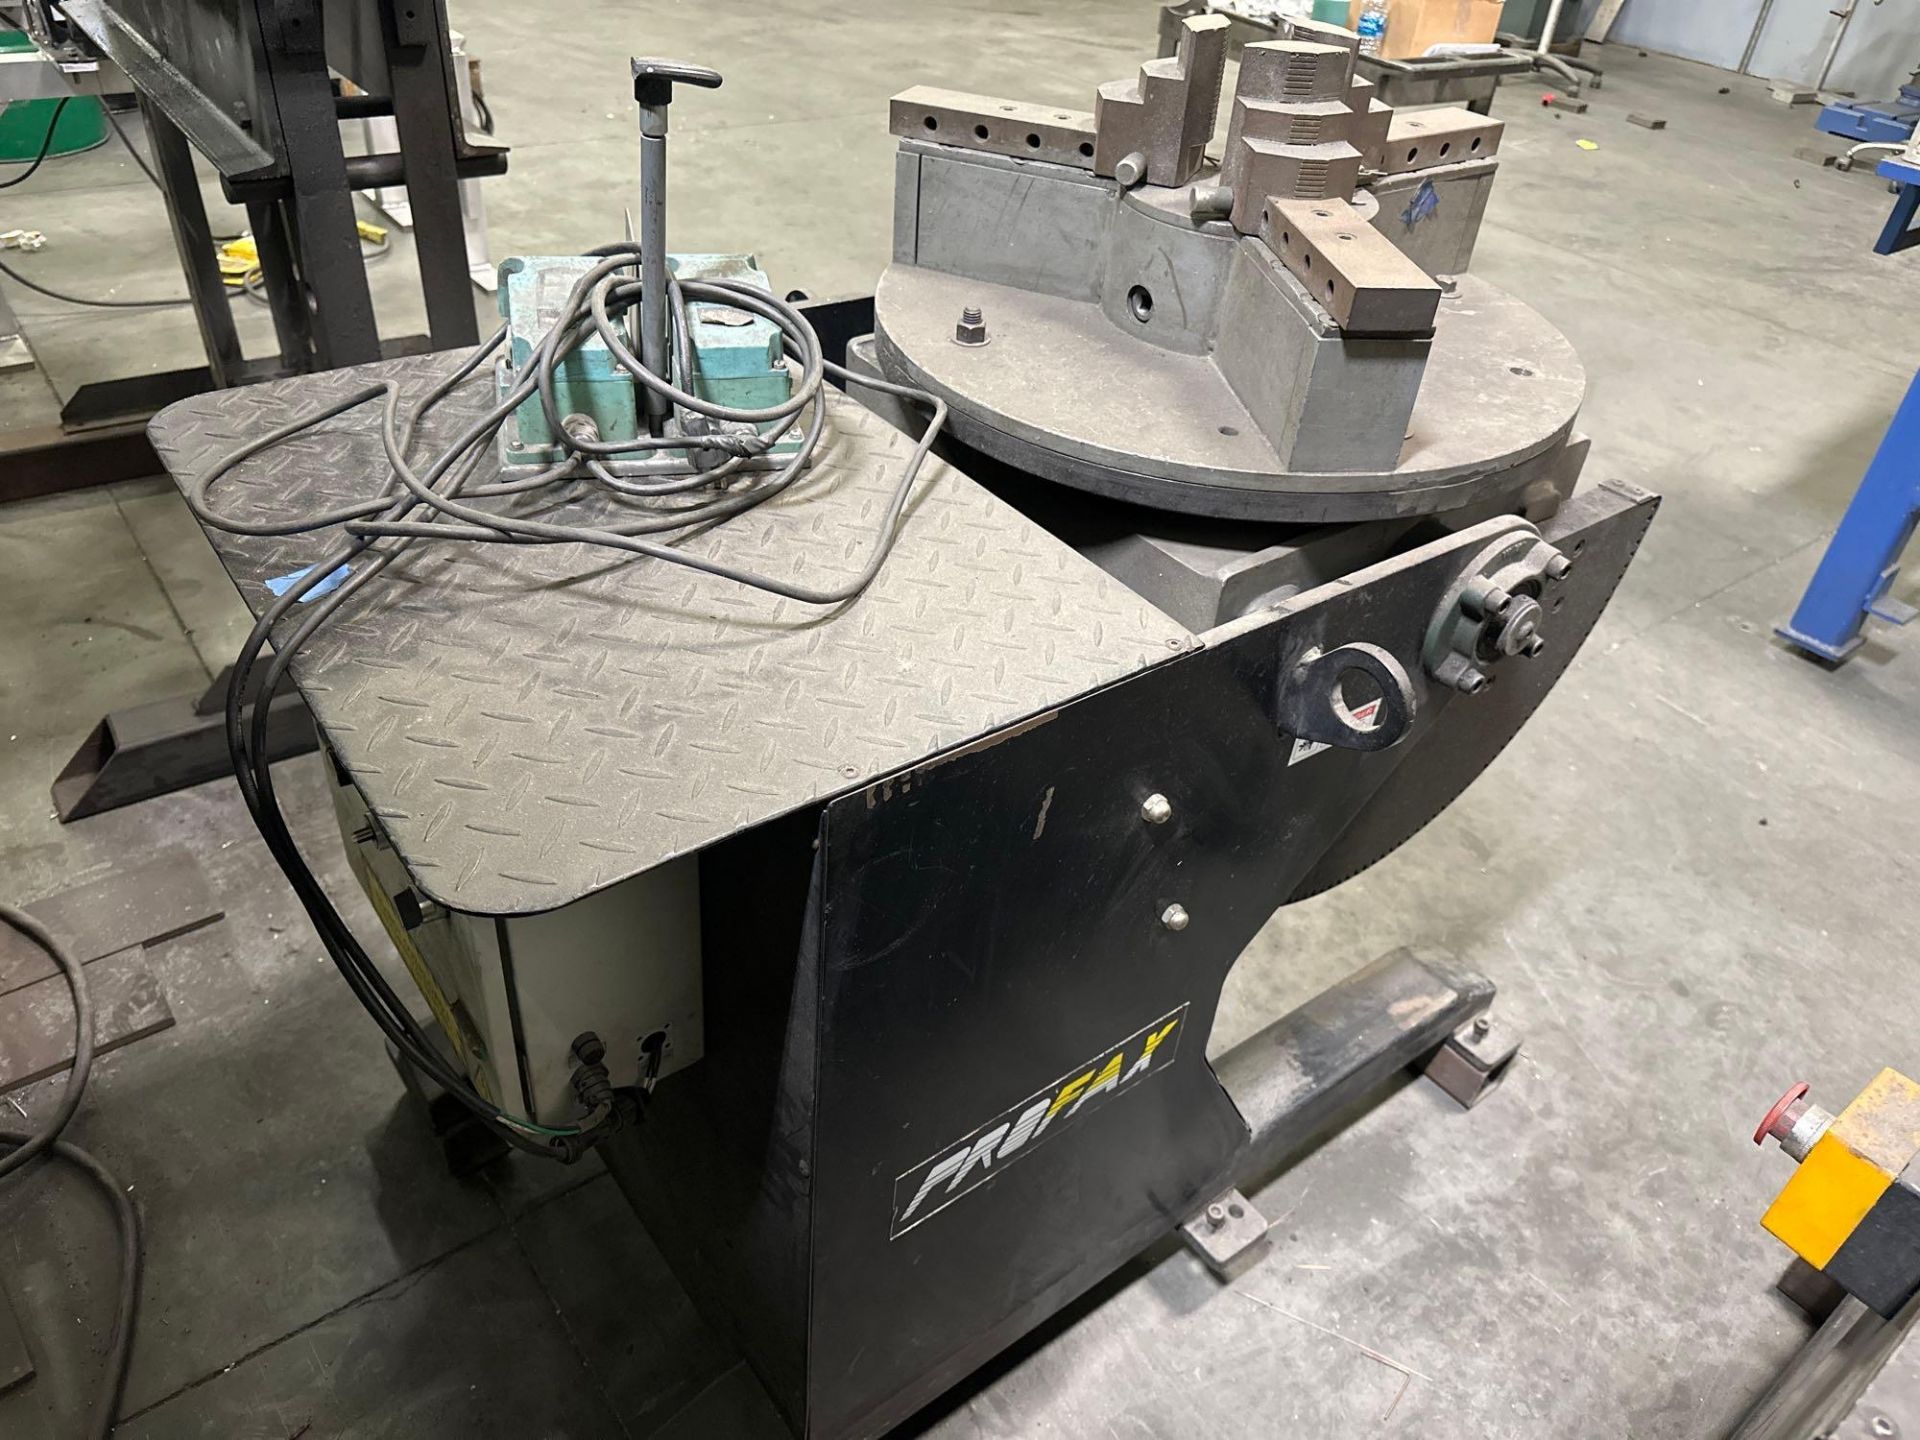 Profax WP-1000 Welding Postioner. 25.5” Table, 2 rpm, 1750lbs Cap, 0-135 Angle, s/n wp10 - 2630 - Image 4 of 7